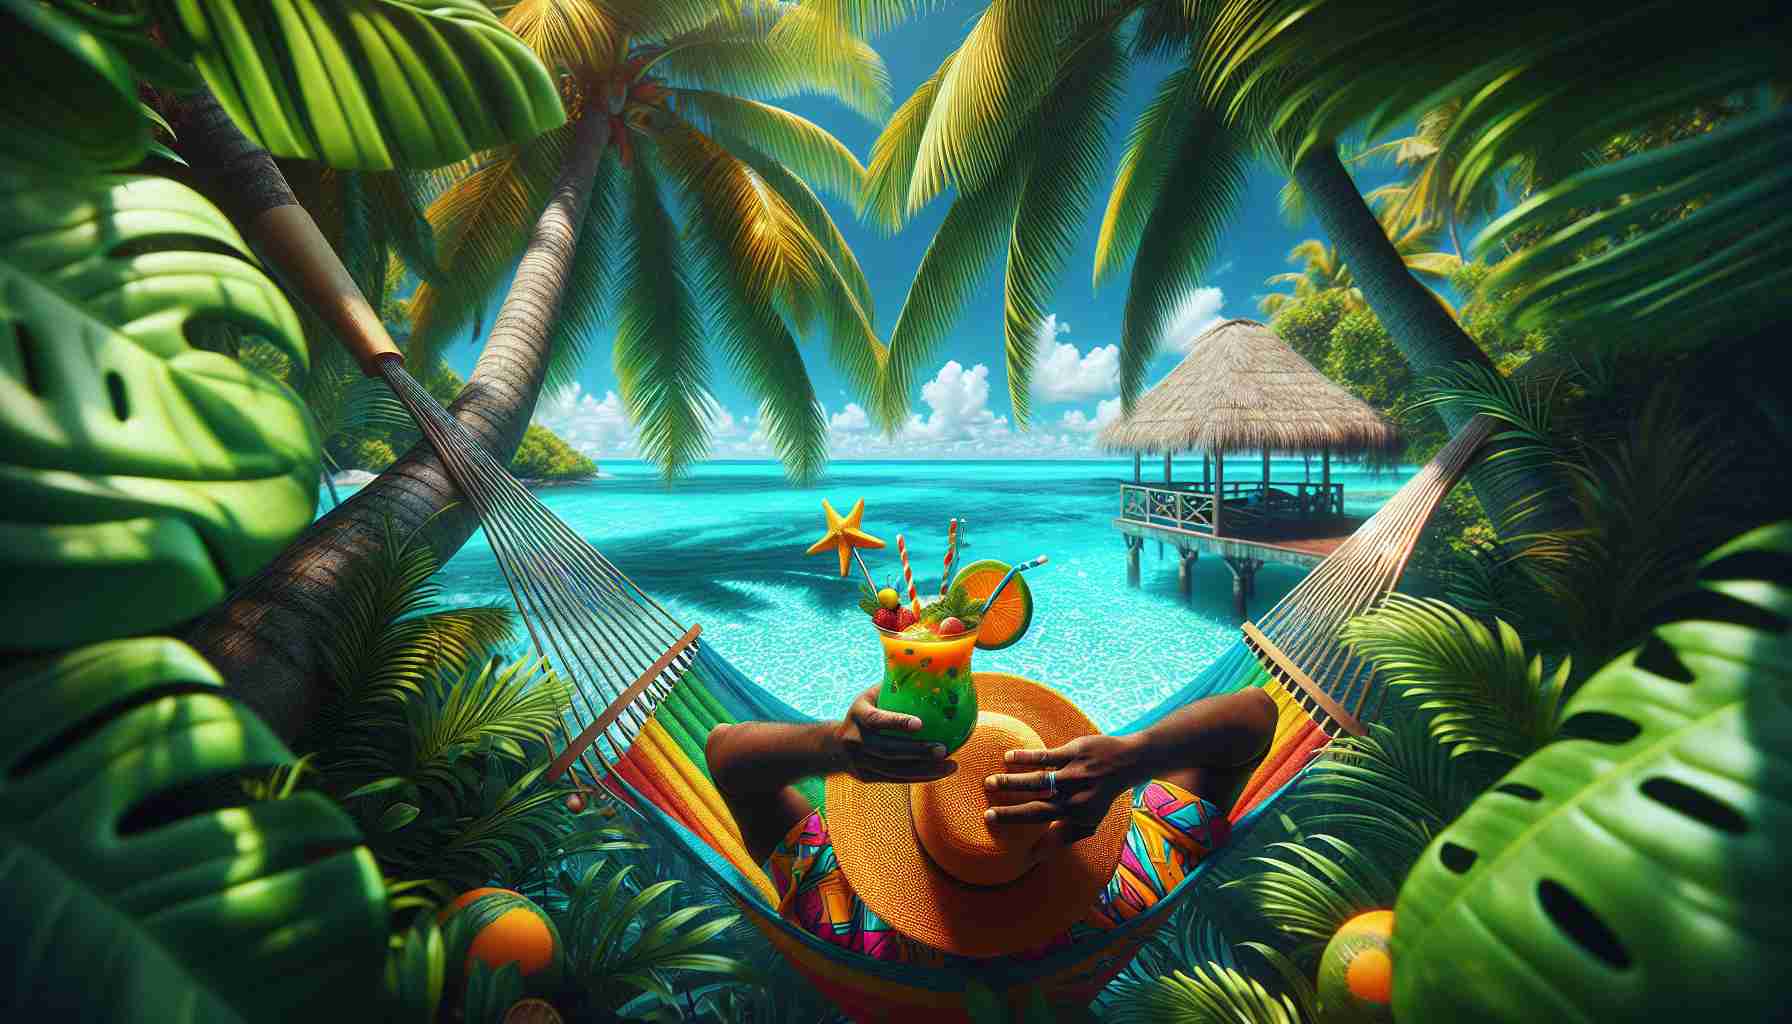 High-definition visual representation of a relaxing, tropical scene. A vibrant landscape where a gentle breeze rustles the palm fronds, turquoise waters shimmering under the sun. A person of black descent, clad in vibrant beach-wear, is enjoying a cool tropical drink framed by slices of exotic fruit. The straw hat they wear provides shade from the sun, as they kick back on a hammock strung between two sturdy palm trees. A sensation of cooling off amidst a tropical paradise is intended to be deeply conveyed in this image.